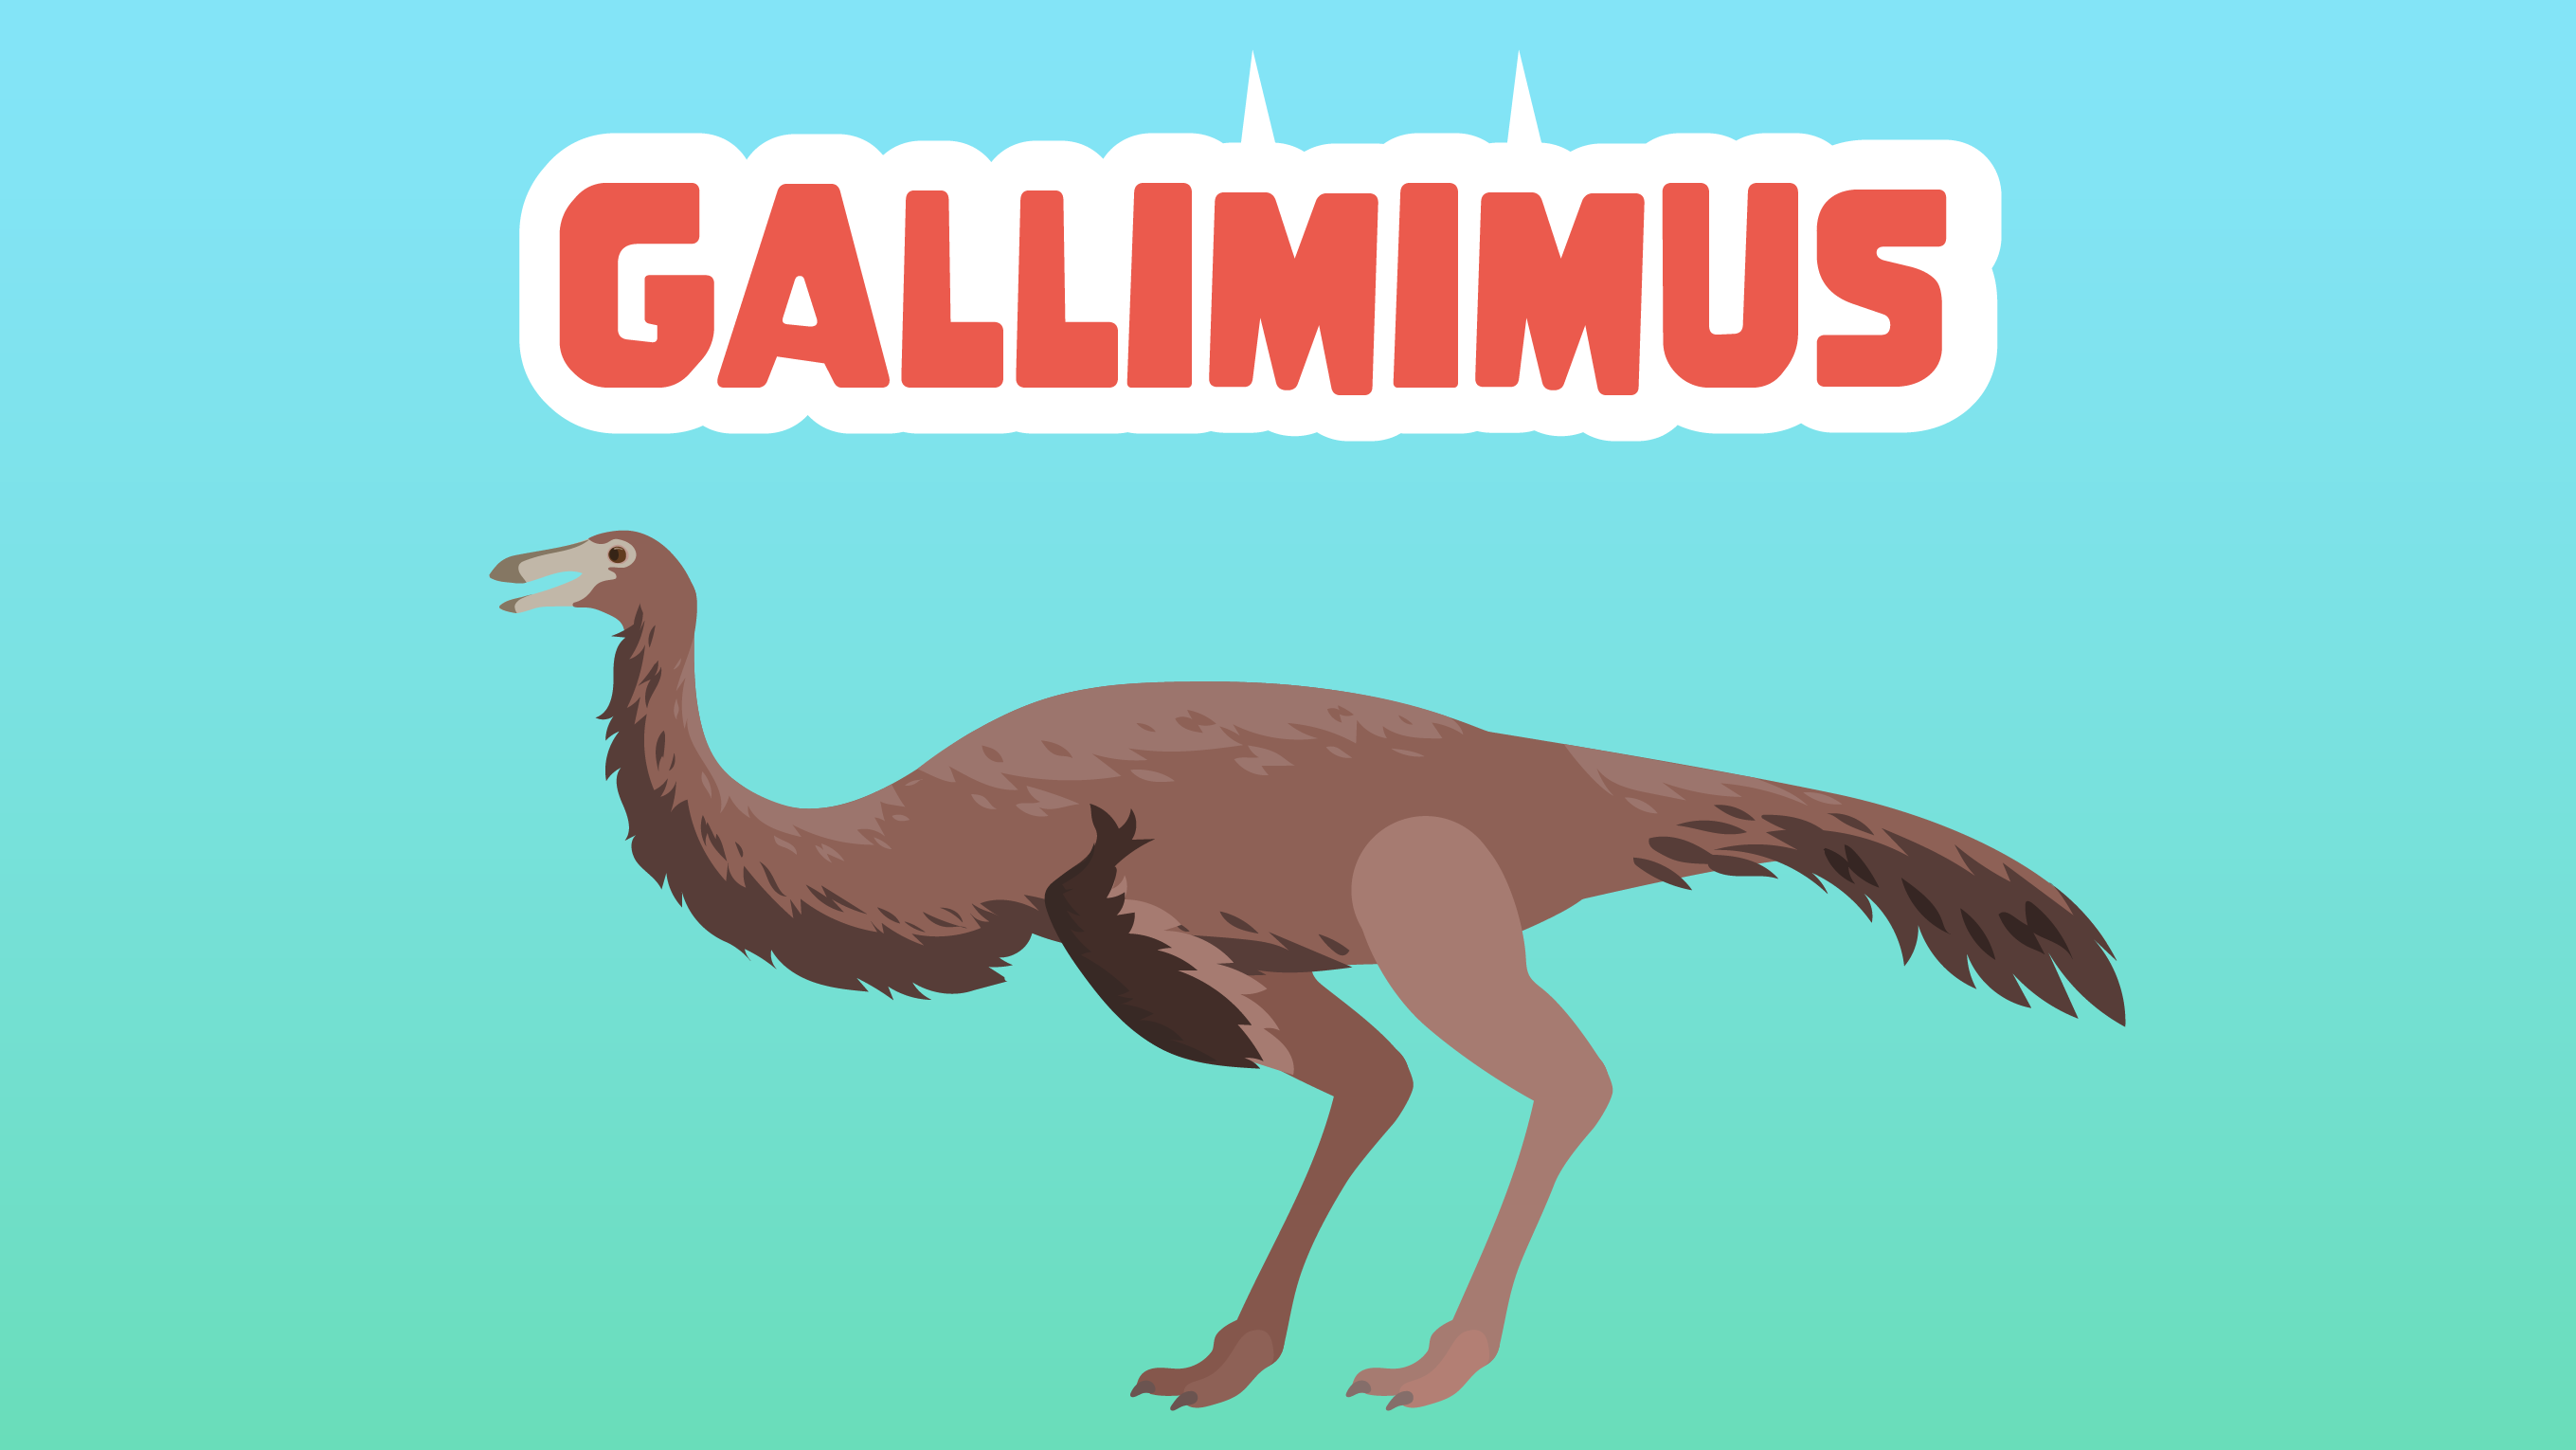 Gallimimus Facts for Kids – 5 Great Facts about The Gallimimus